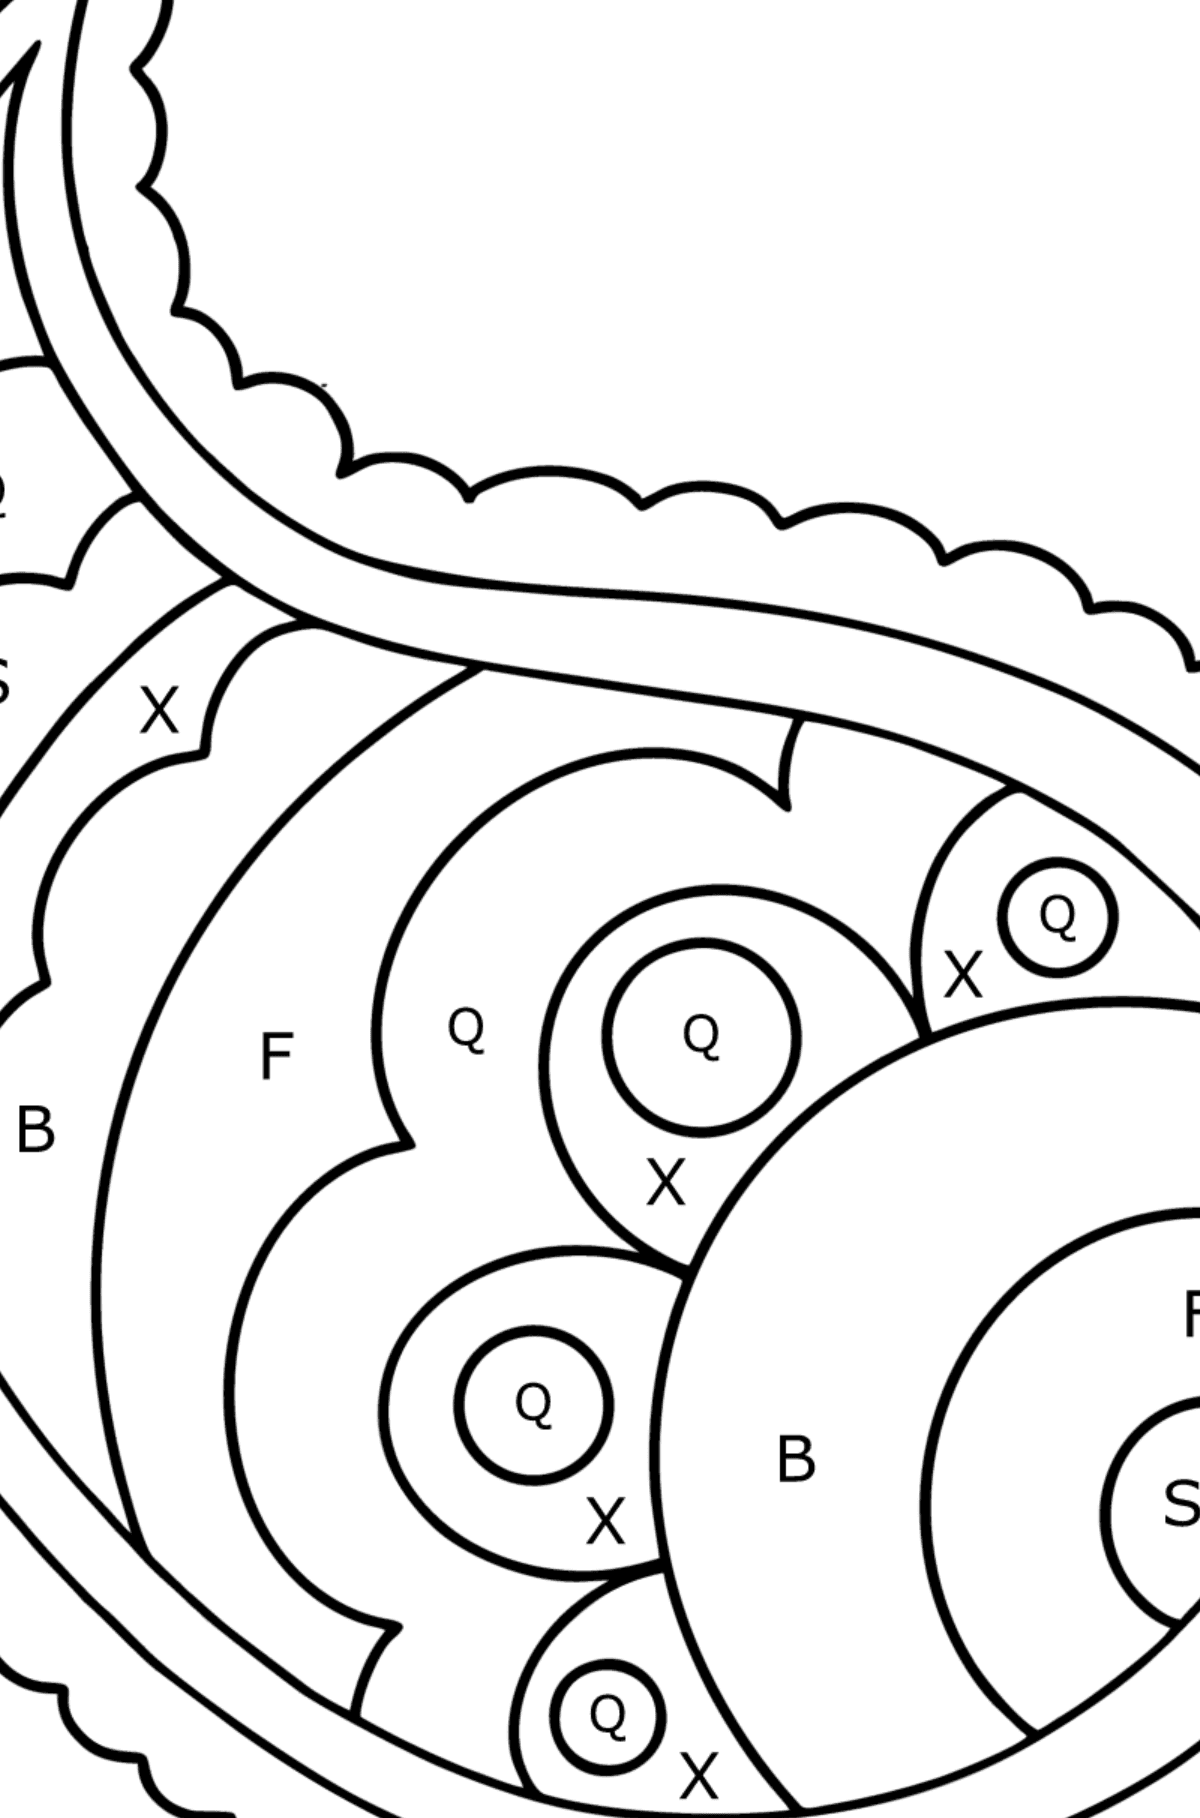 Paisley coloring page - 17 Elements - Coloring by Letters for Kids